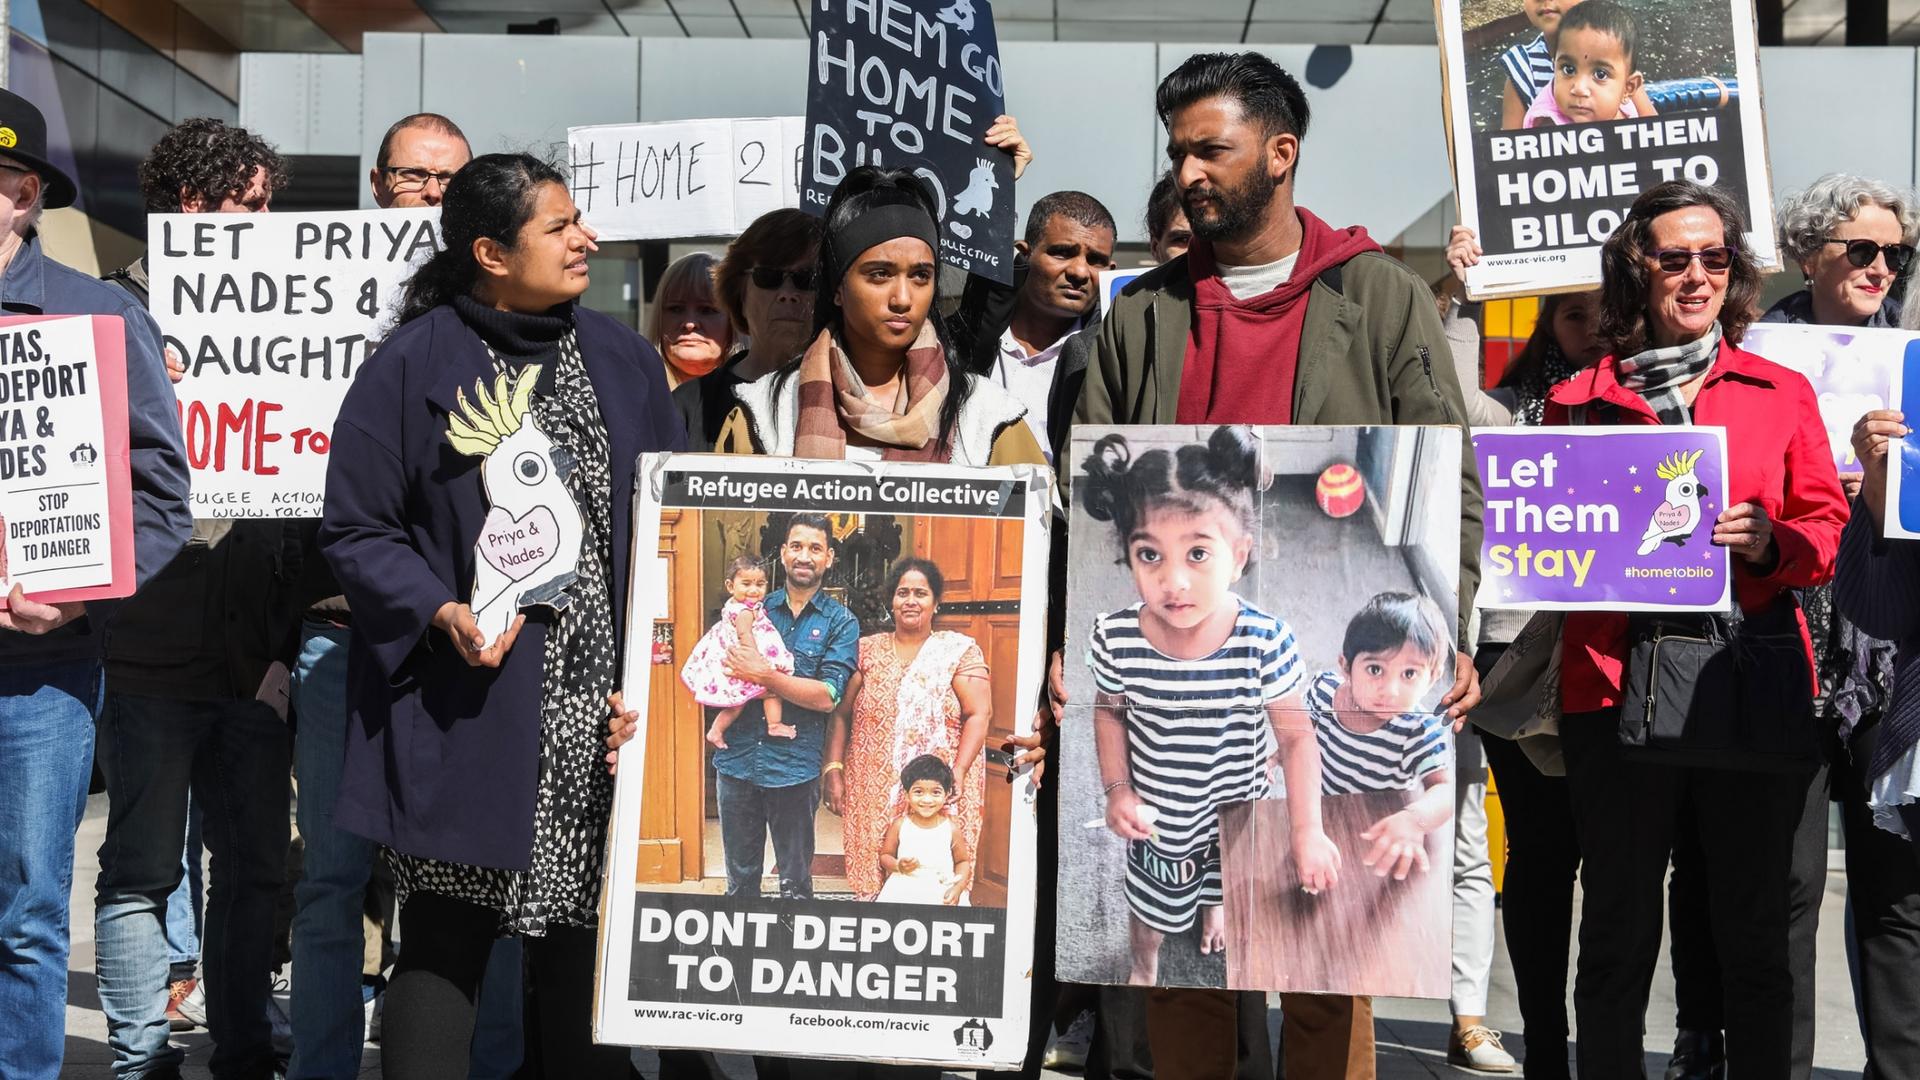 A group of protesters are shown holding placards with pictures of a Tamil family that includes the father, mother and their two small children.